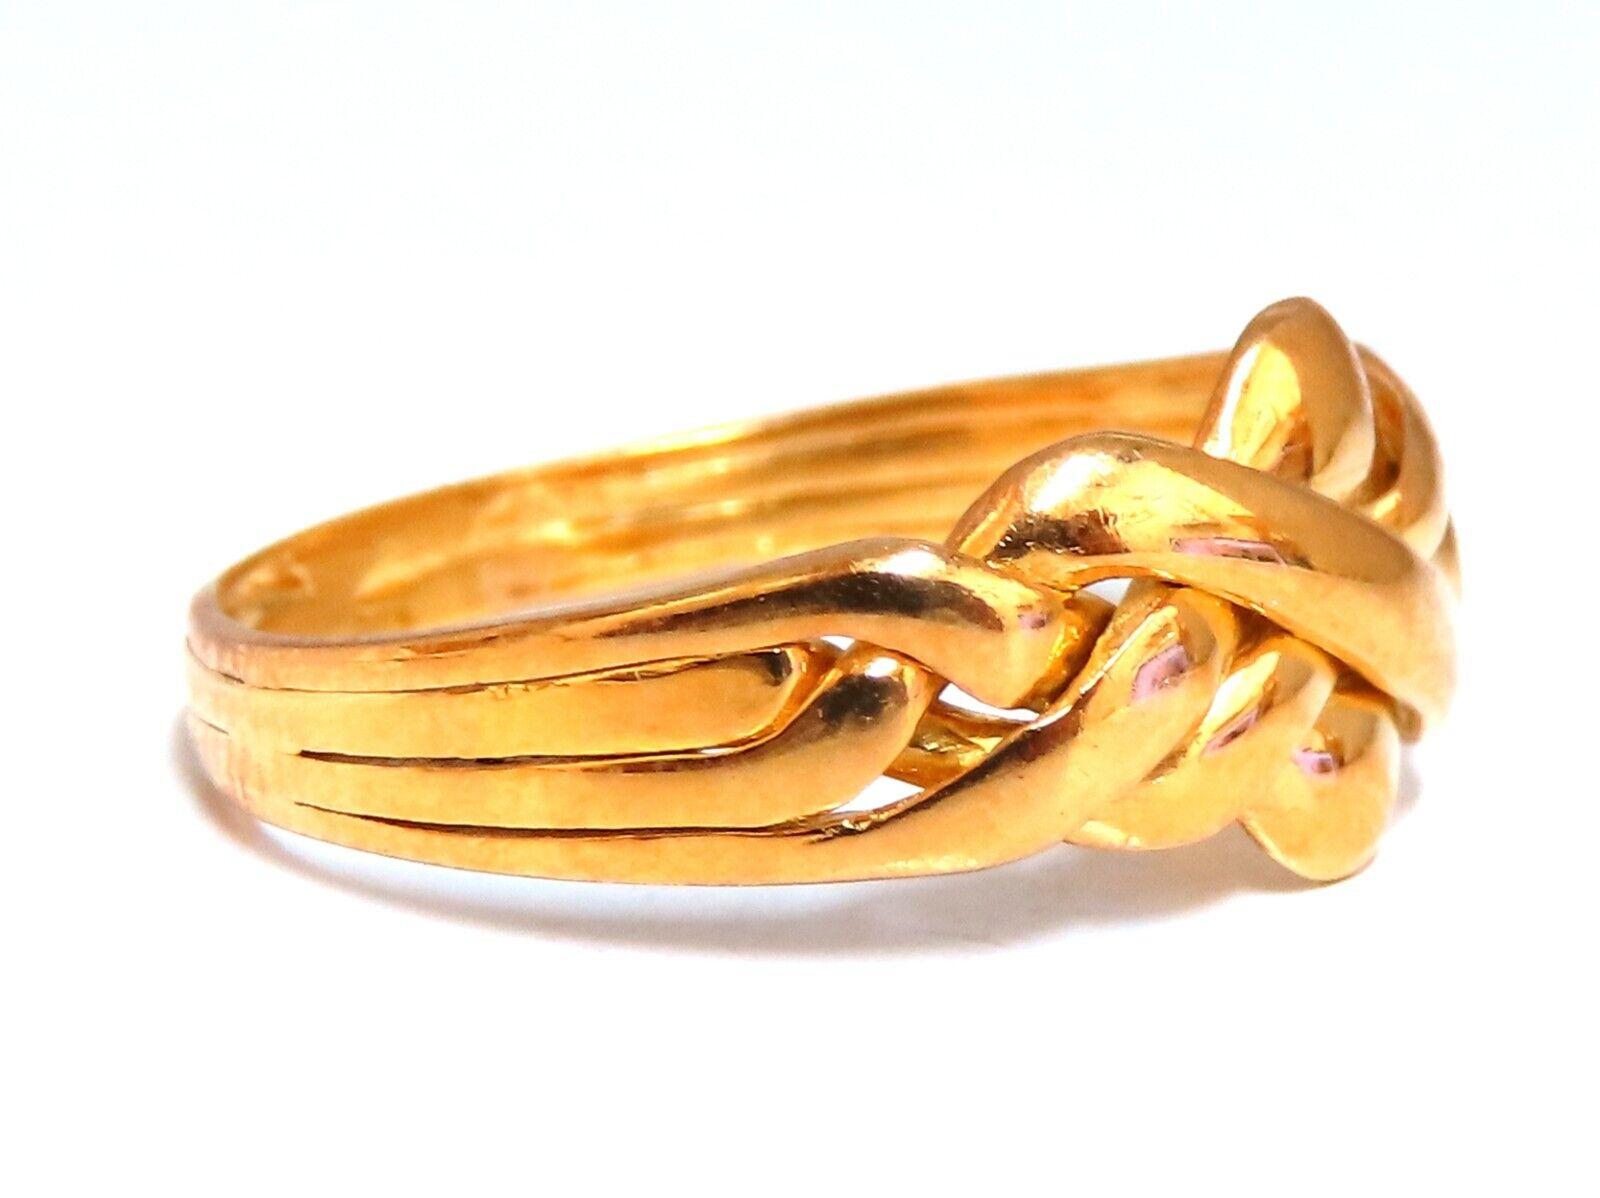 Retro, neoclassical interlink braid band

9mm Wide Gold Band.

Size 8.5

3.4 Grams. / 18Kt yellow gold

Depth: 2mm